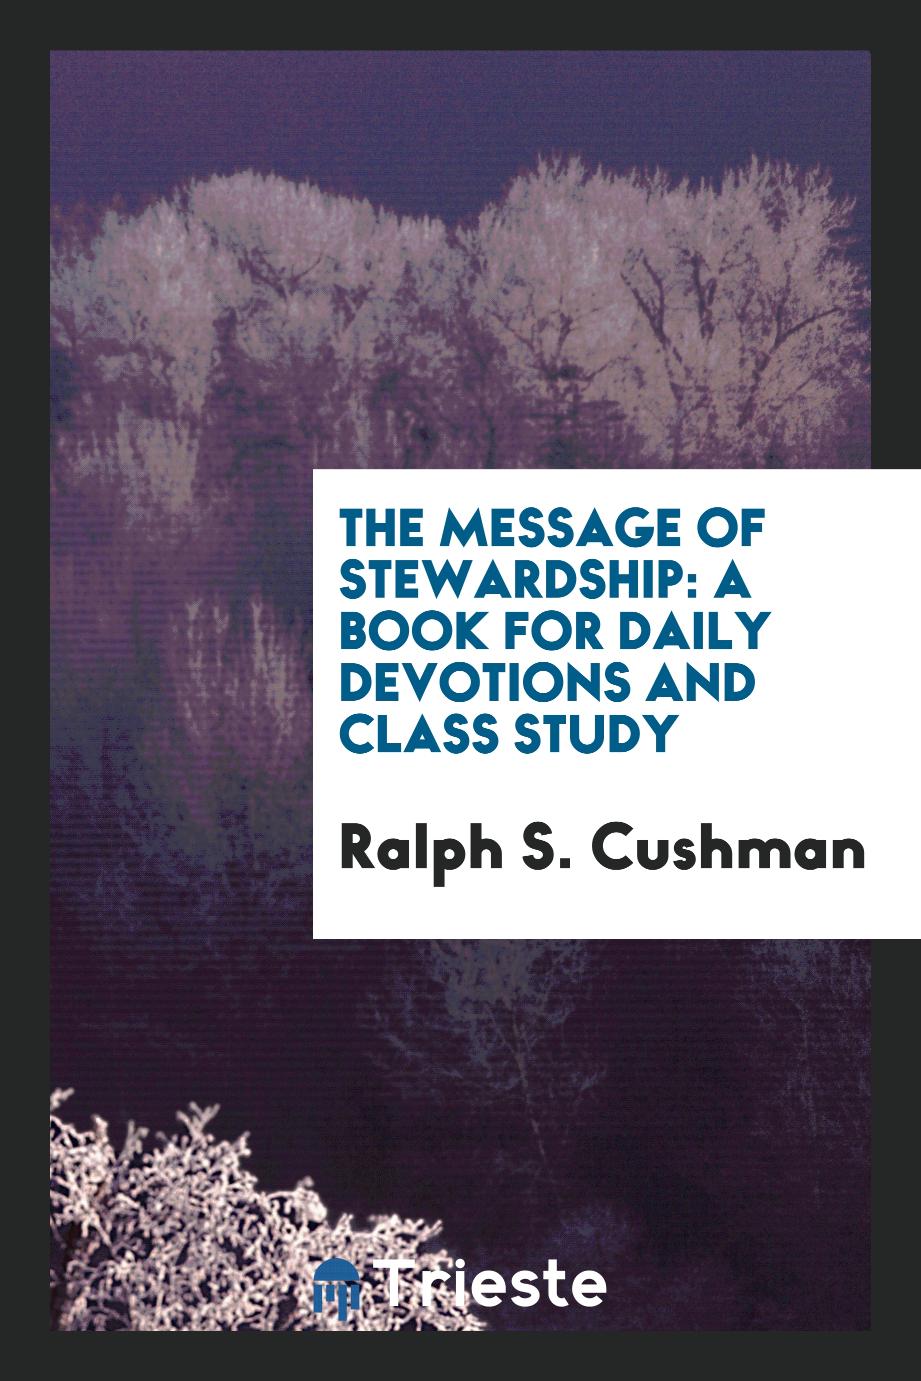 Ralph S. Cushman - The message of stewardship: a book for daily devotions and class study